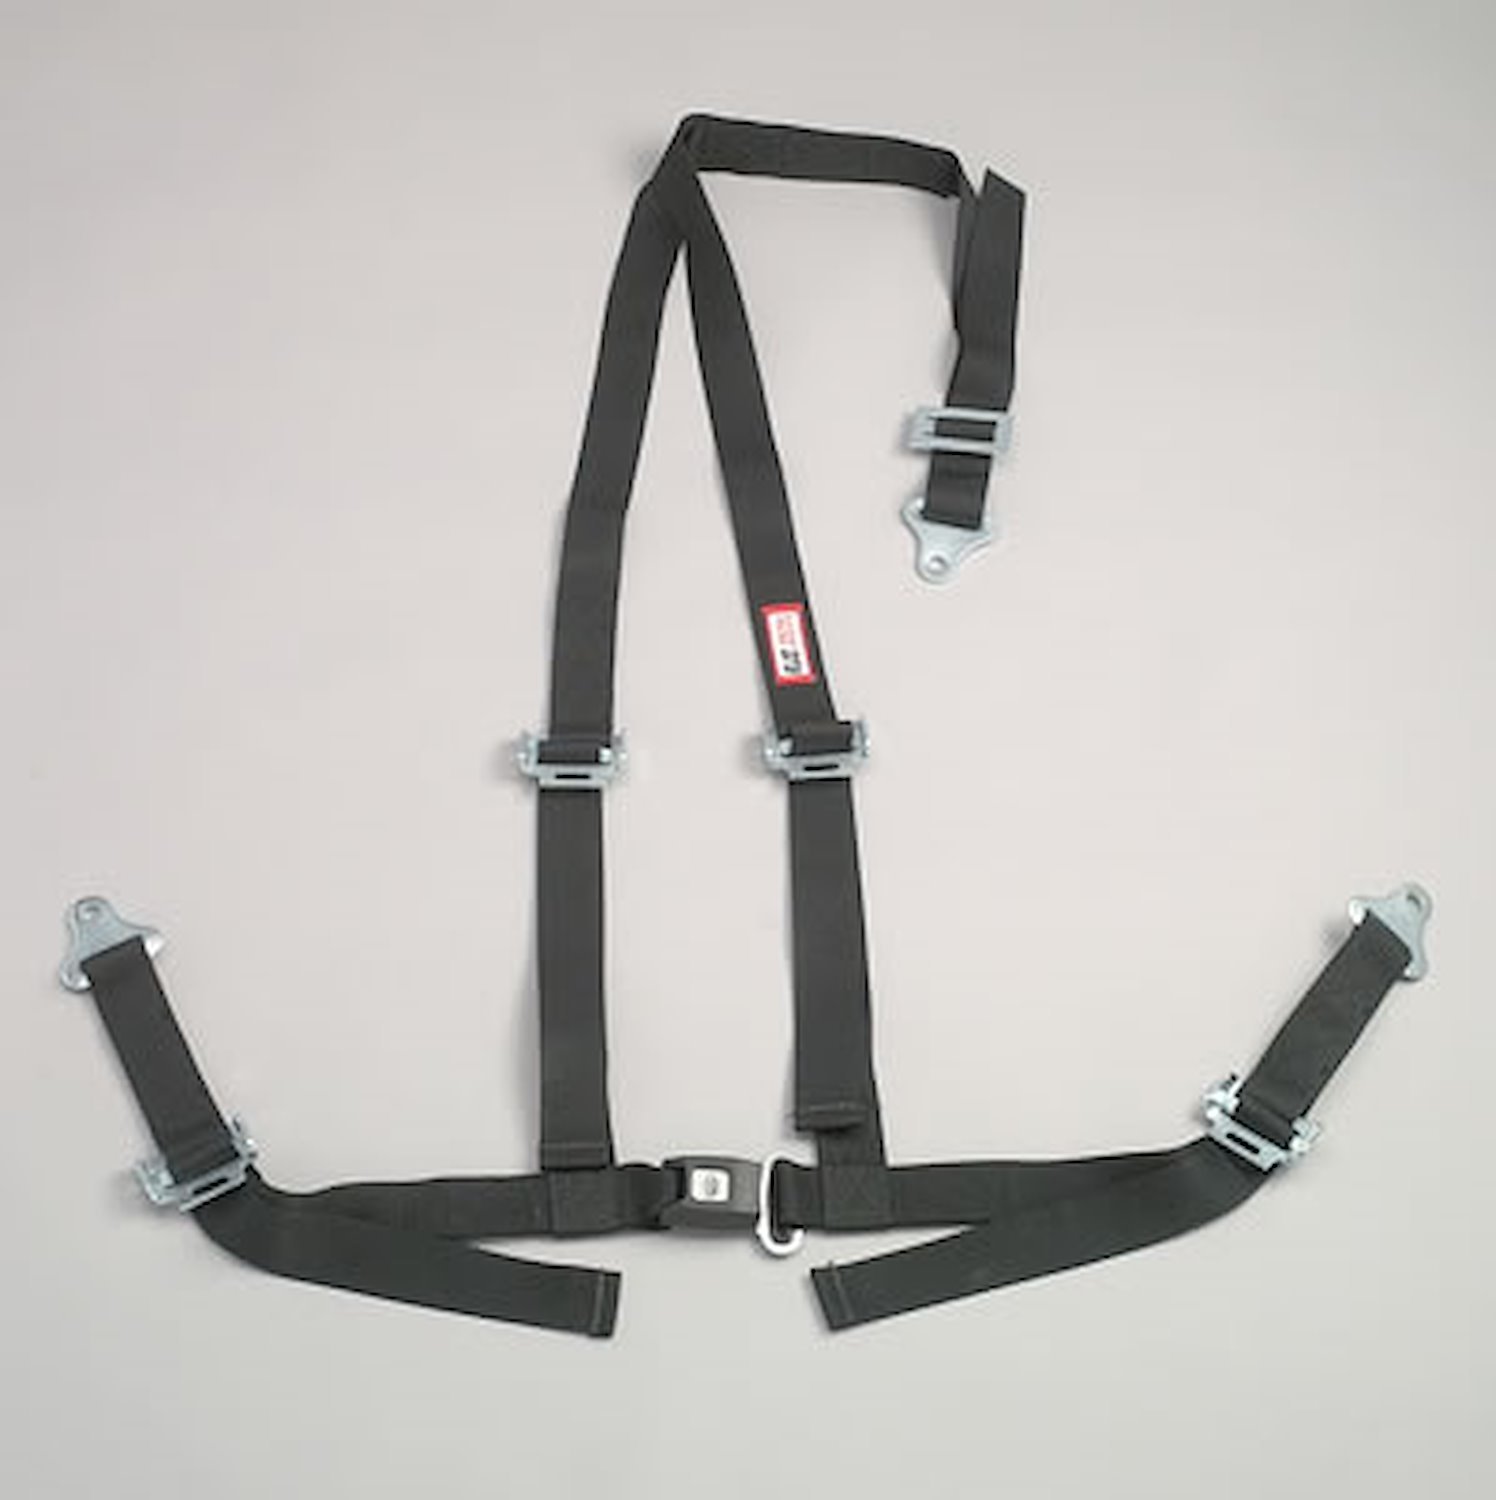 NON-SFI B&T HARNESS 2 PULL DOWN Lap Belt 2 S. H. Y FLOOR Mount ALL WRAP ENDS w/STERNUM STRAP OD GREEN